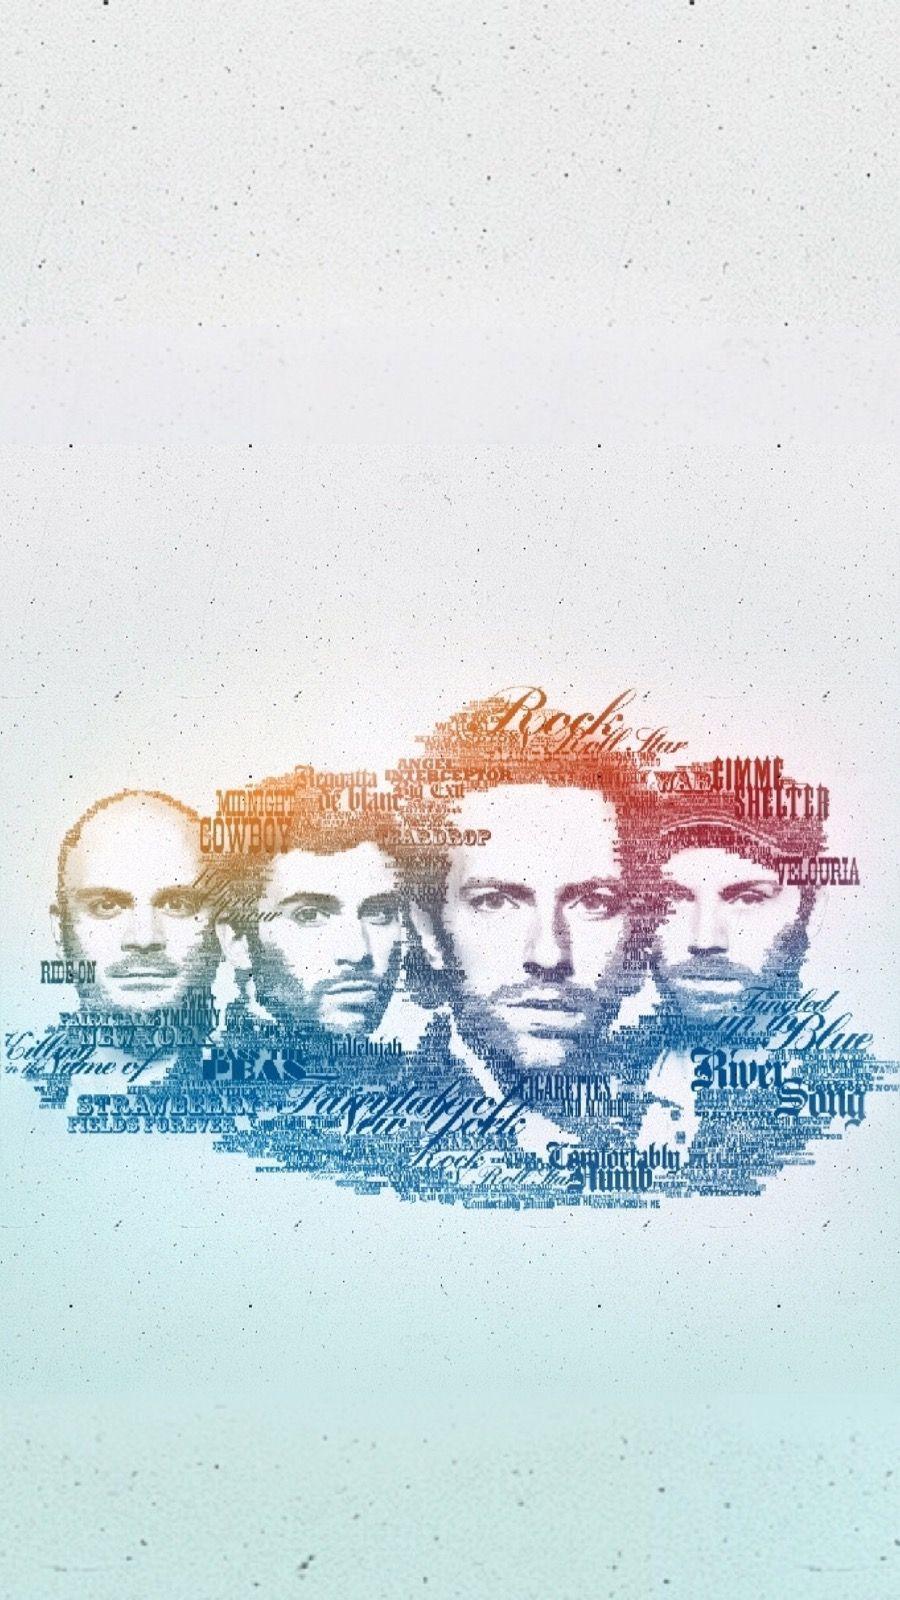 Coldplay Wallpaper For IPhone 7 6s 6. Wallpaper In 2019